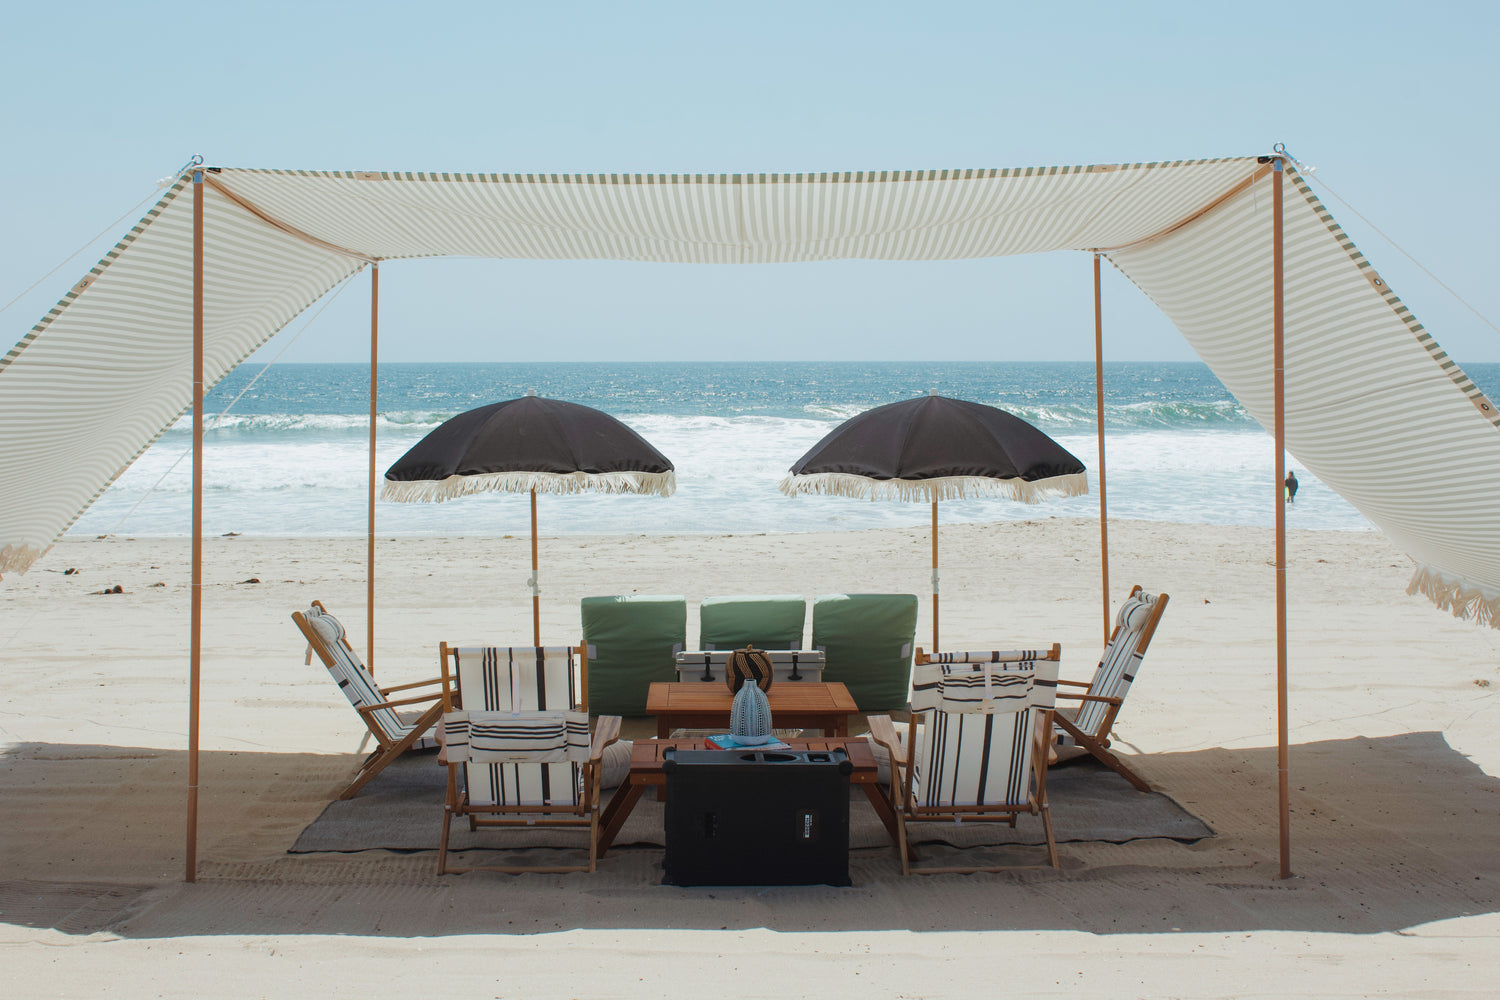 The Villa beach cabana rental with large tent, umbrellas, beach chairs, and lounges in Marina Del Rey, Los Angeles